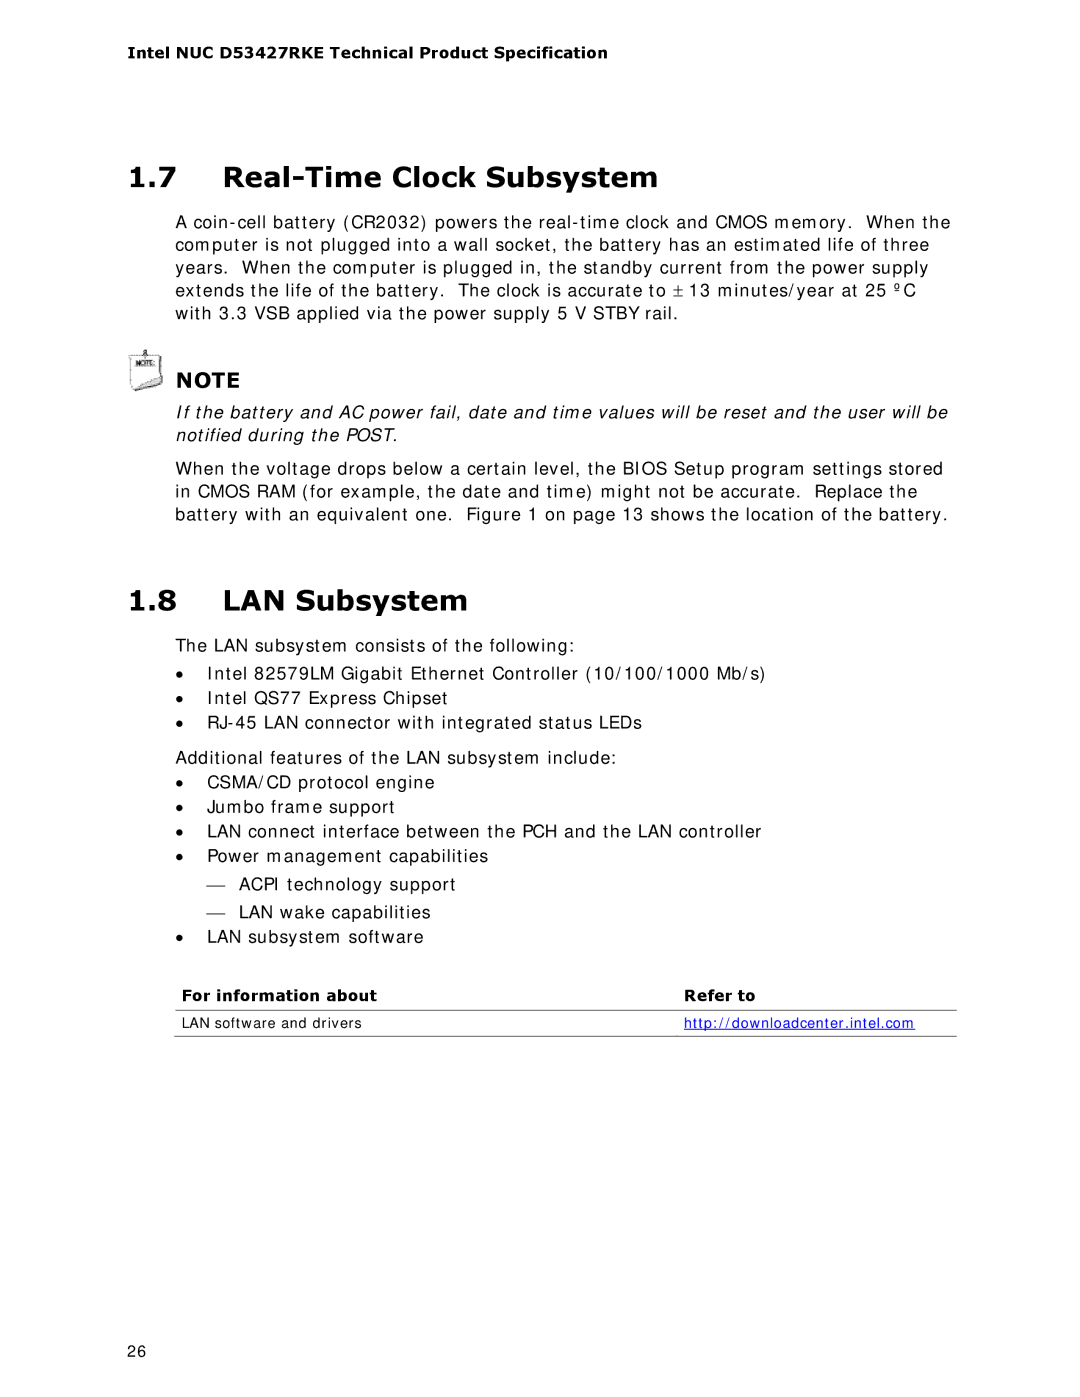 Intel BOXDC53427HYE specifications Real-Time Clock Subsystem, LAN Subsystem 